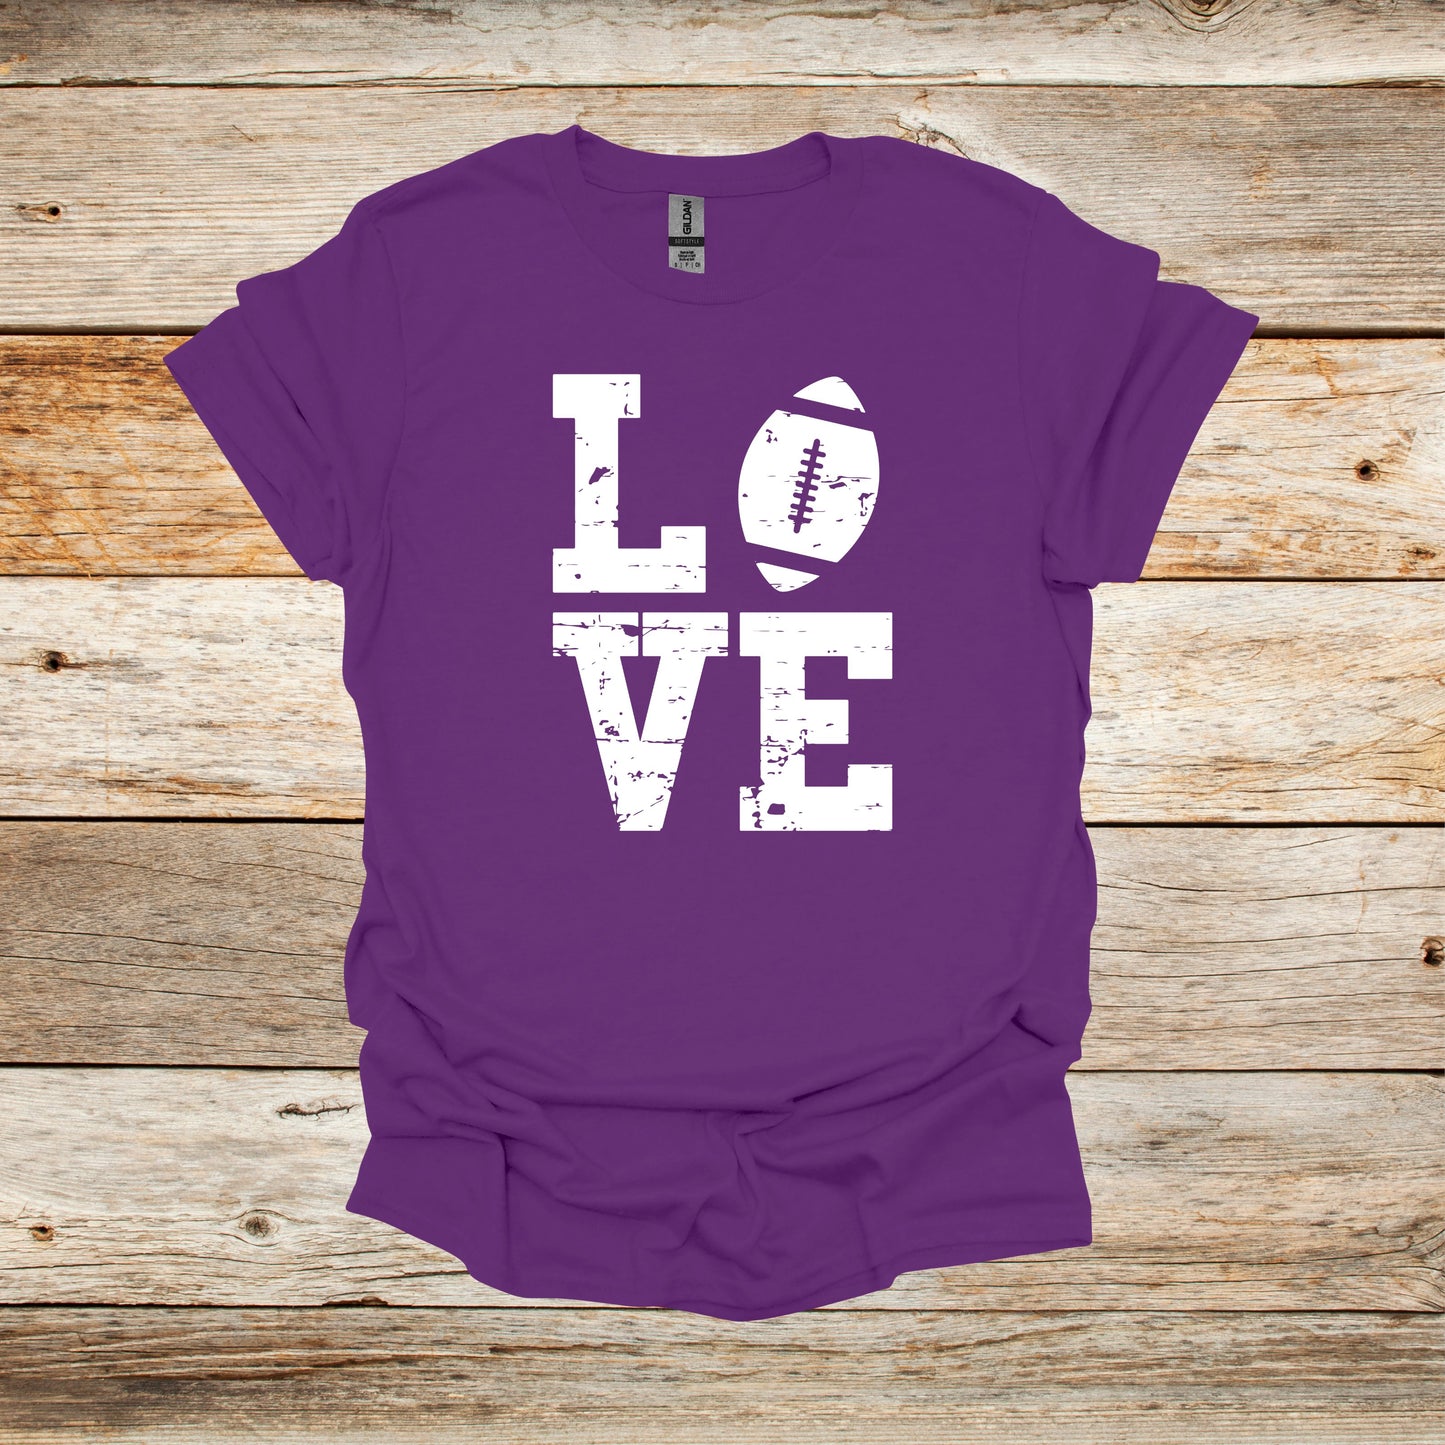 Football T-Shirt - LOVE - Adult and Children's Tee Shirts - Sports T-Shirts Graphic Avenue Purple Adult Small 